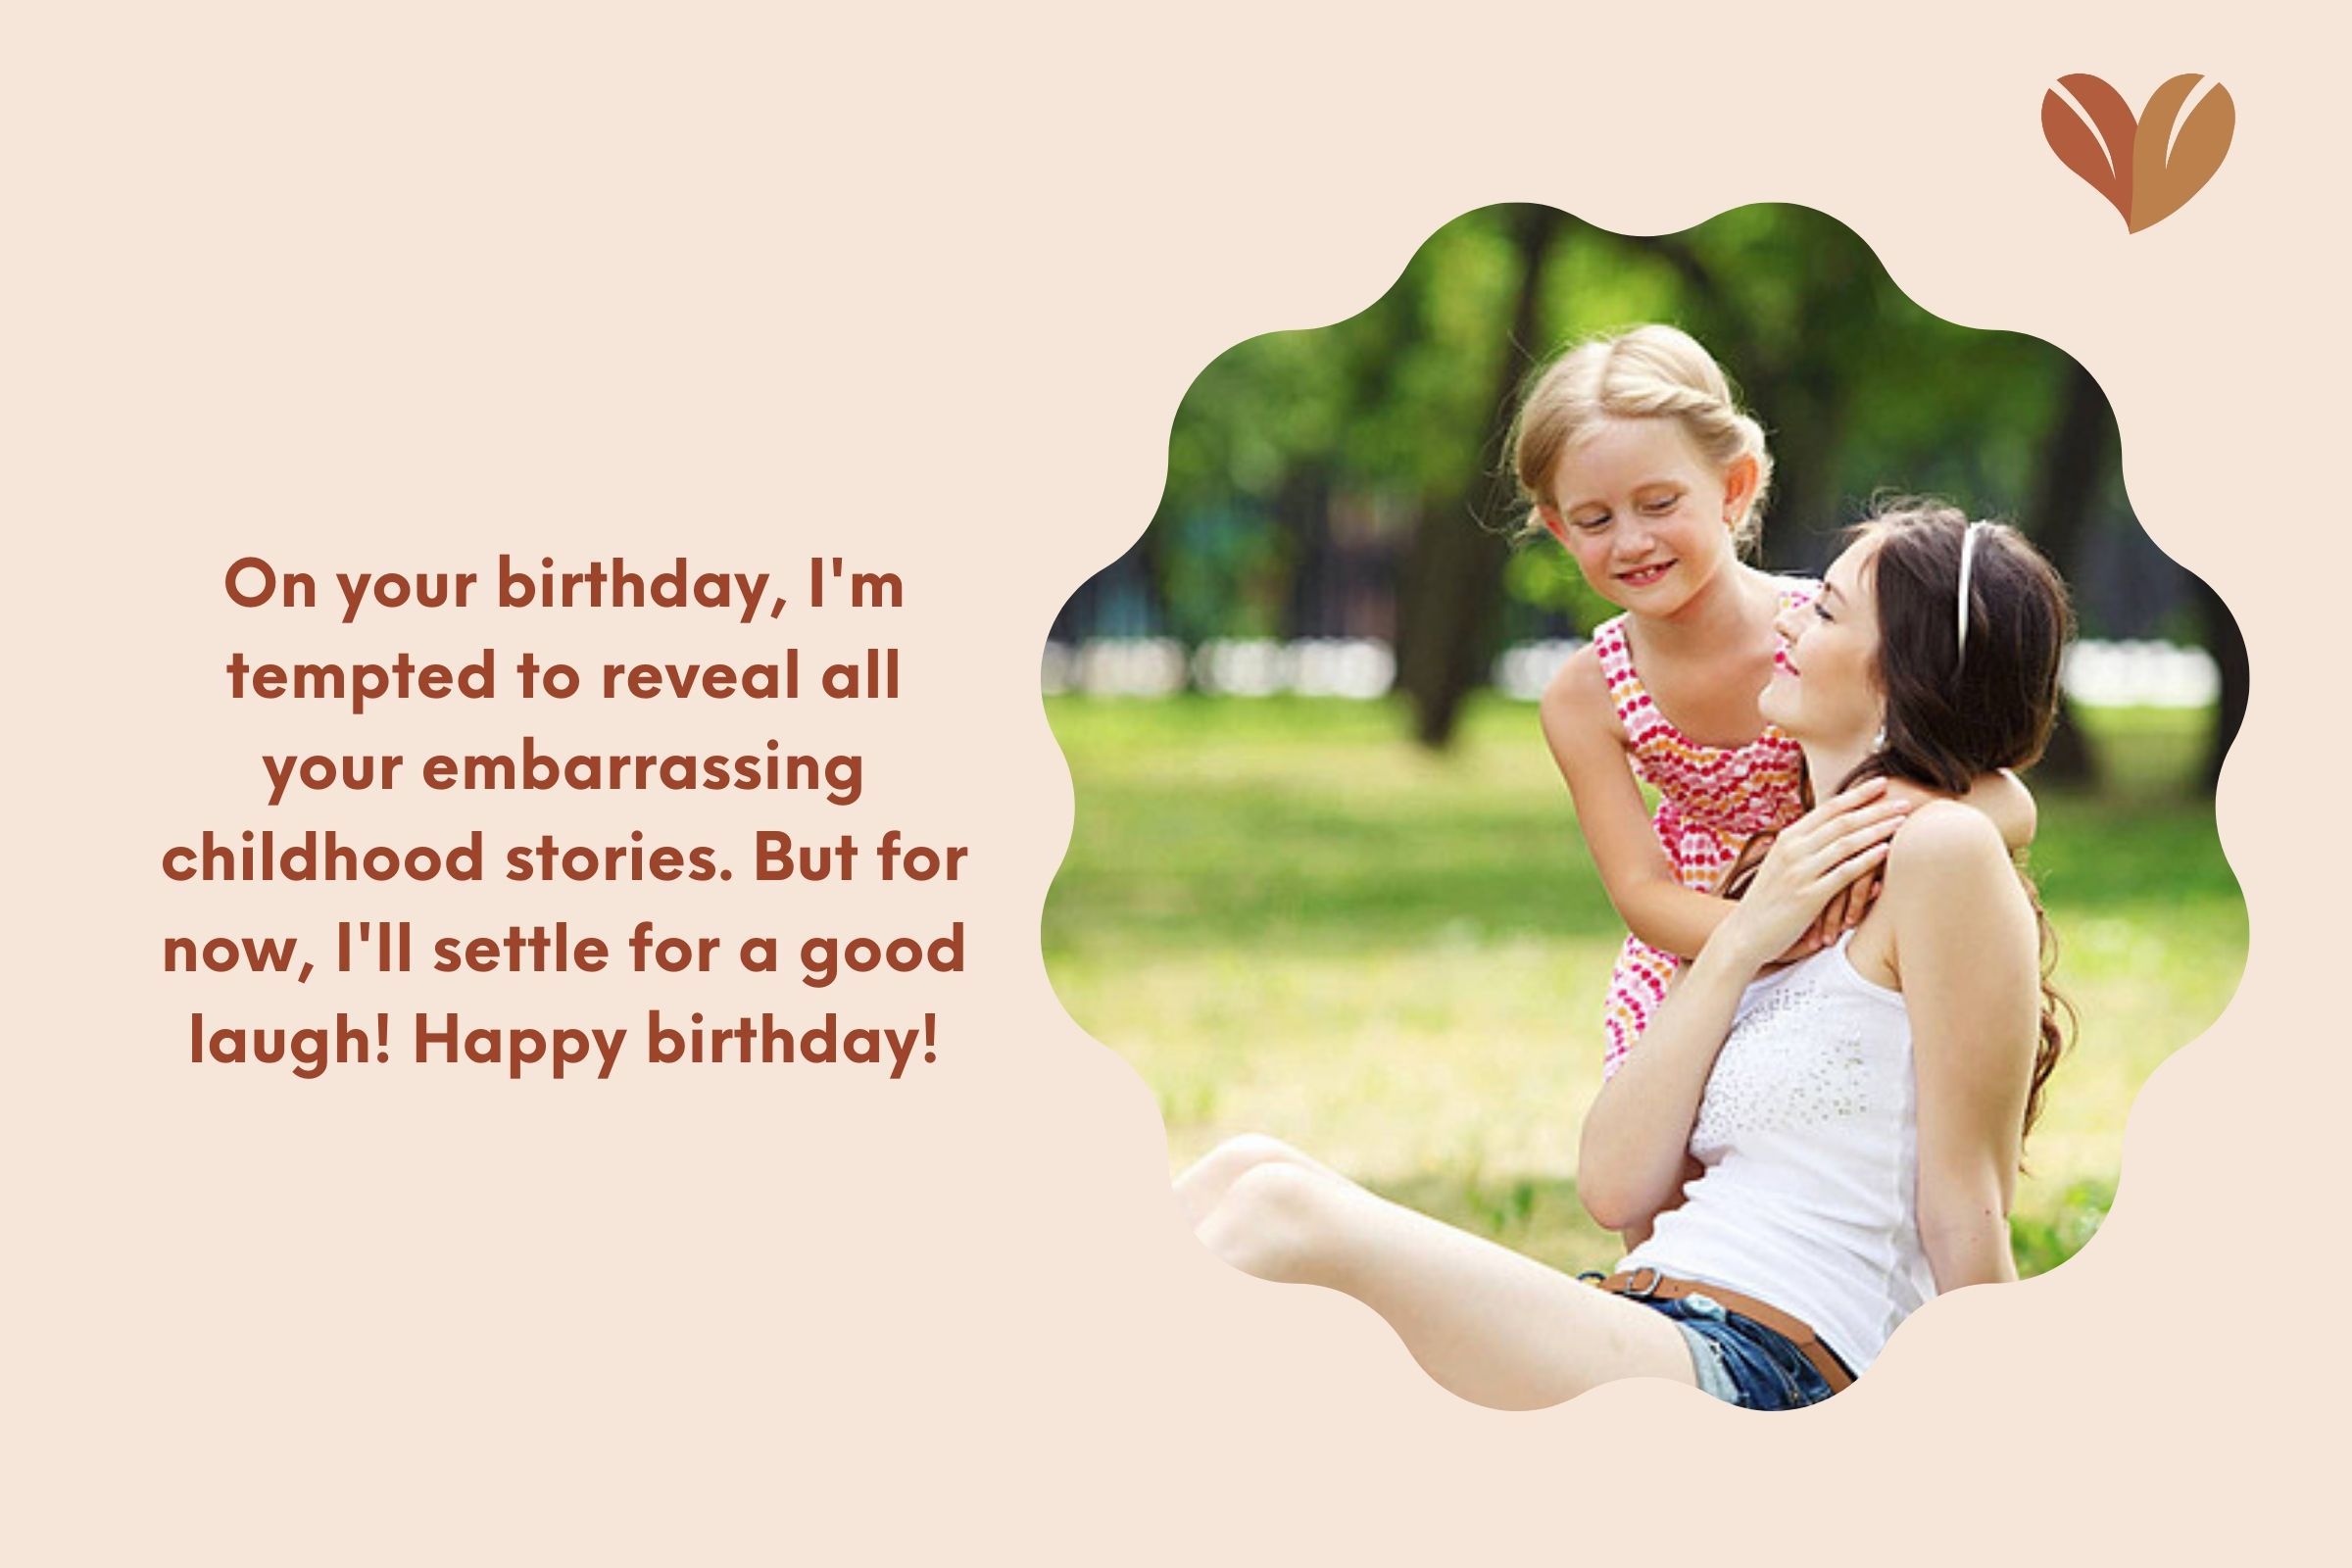 Affectionate birthday greetings for daughter